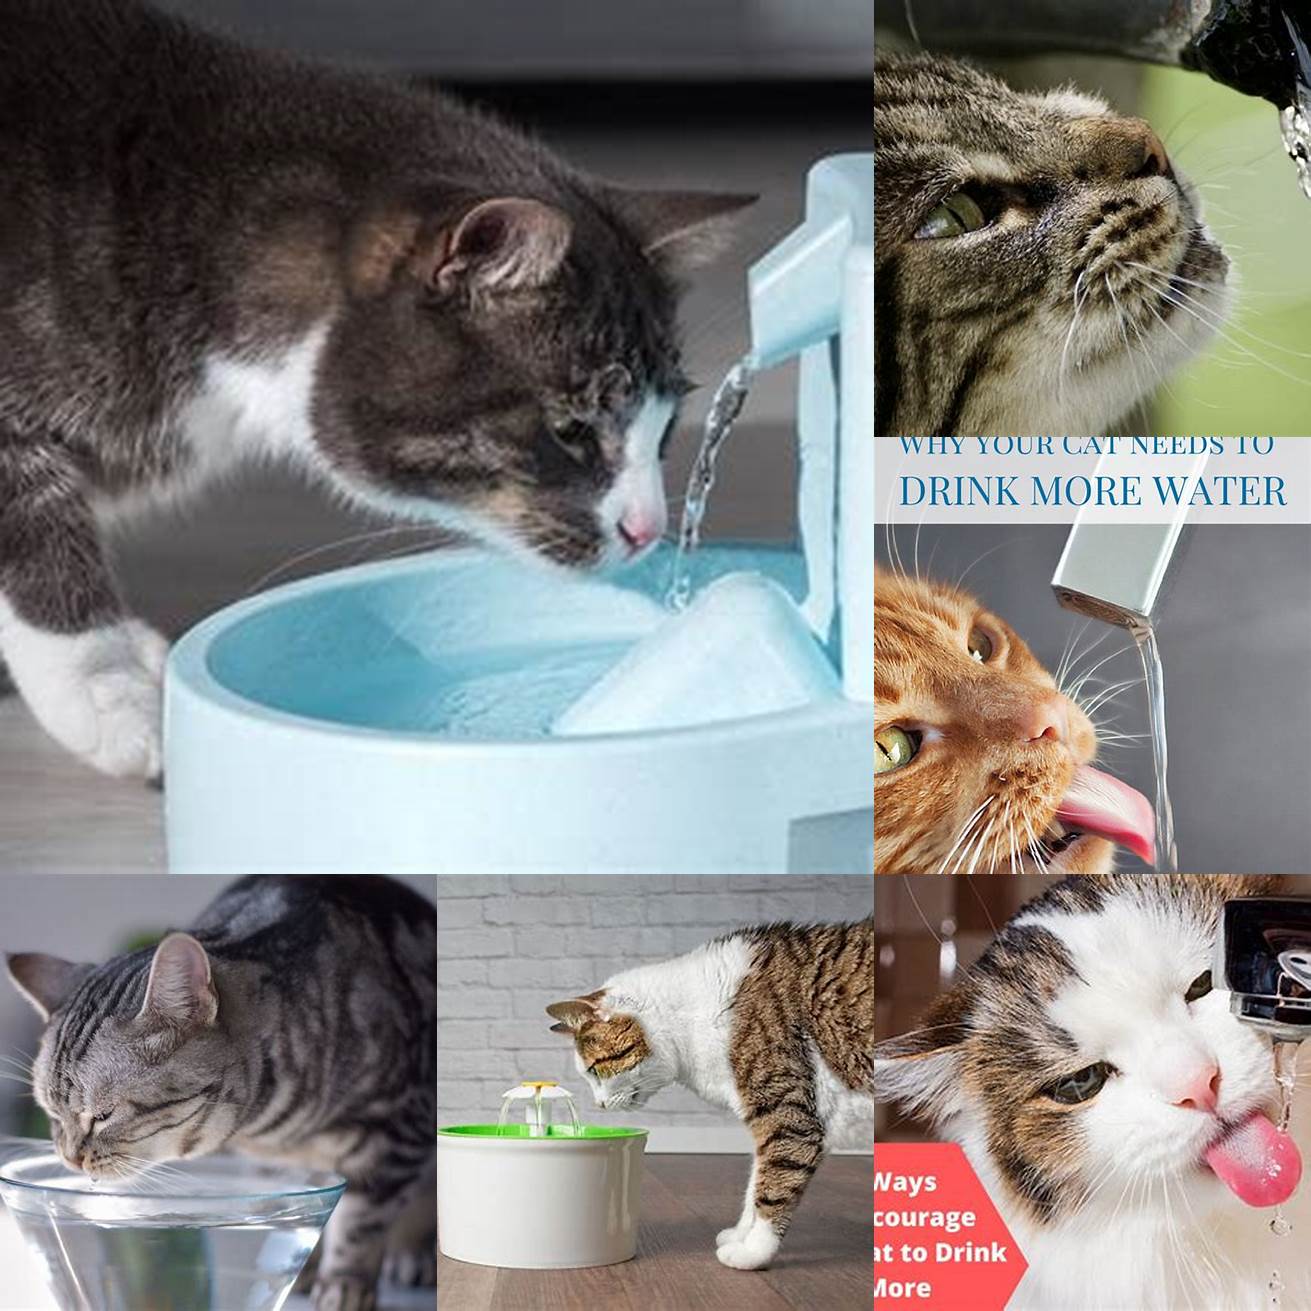 Encourages your cat to drink more water